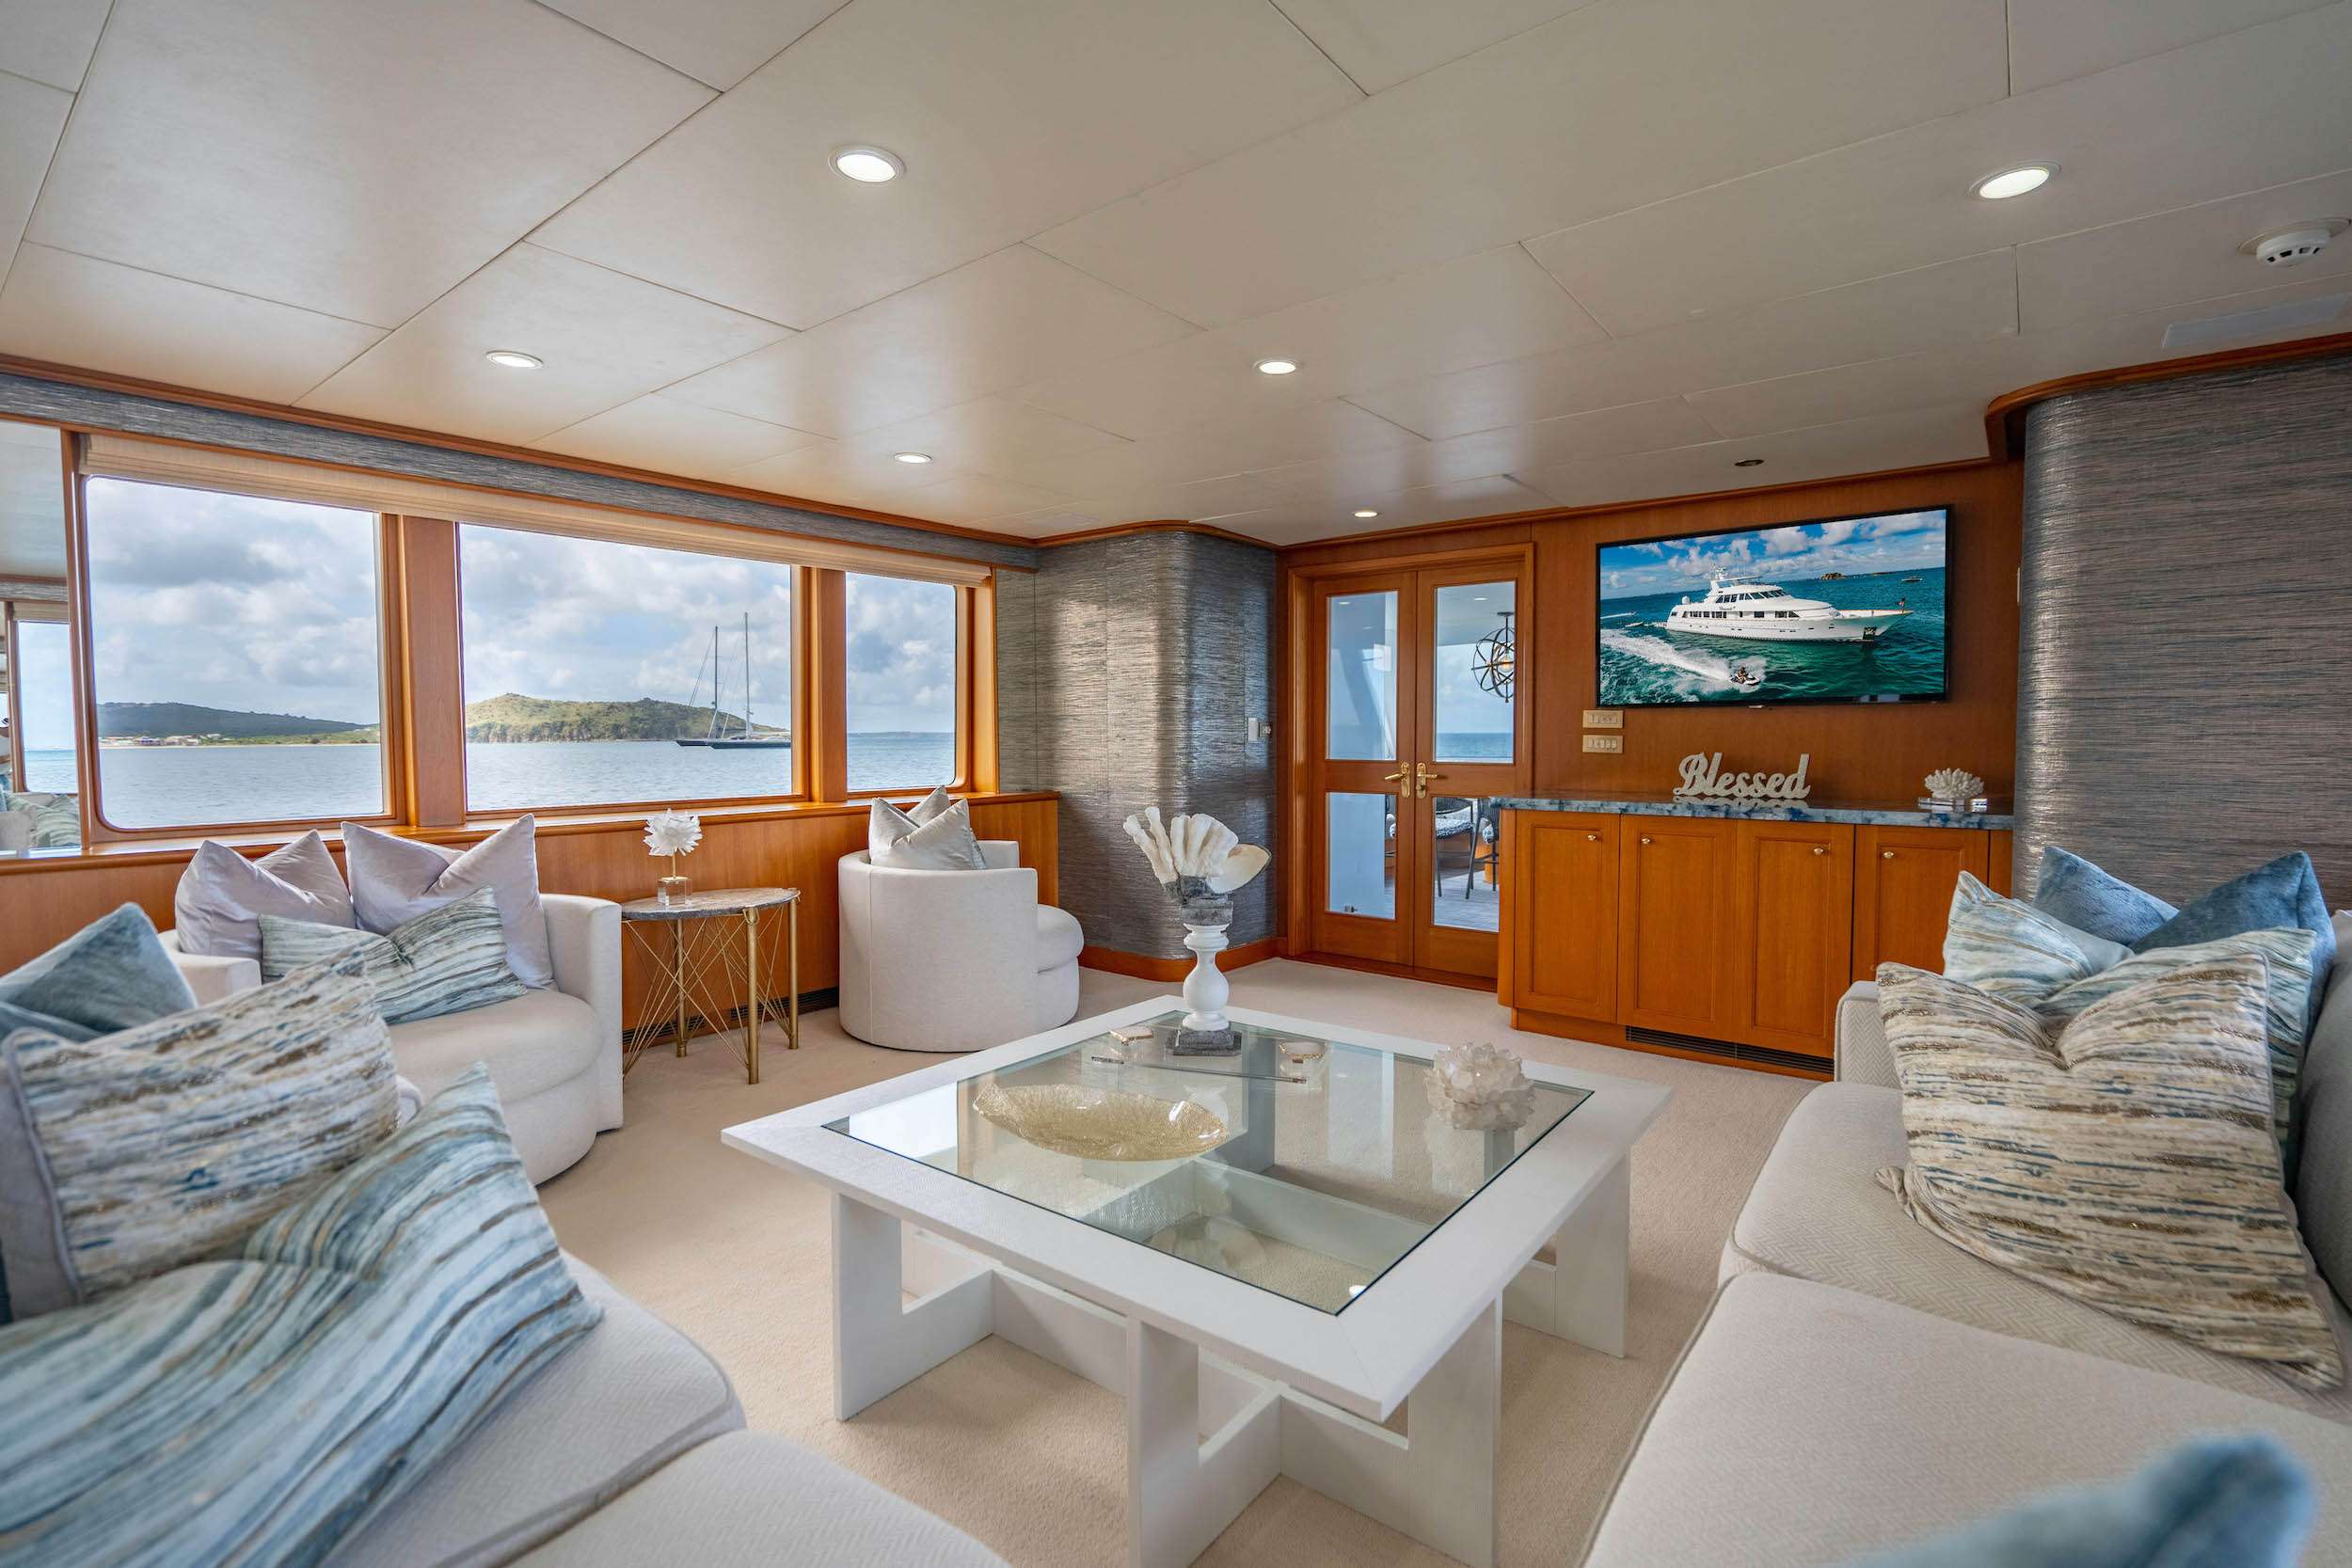 GALE WINDS Yacht Charter - Salon Seating